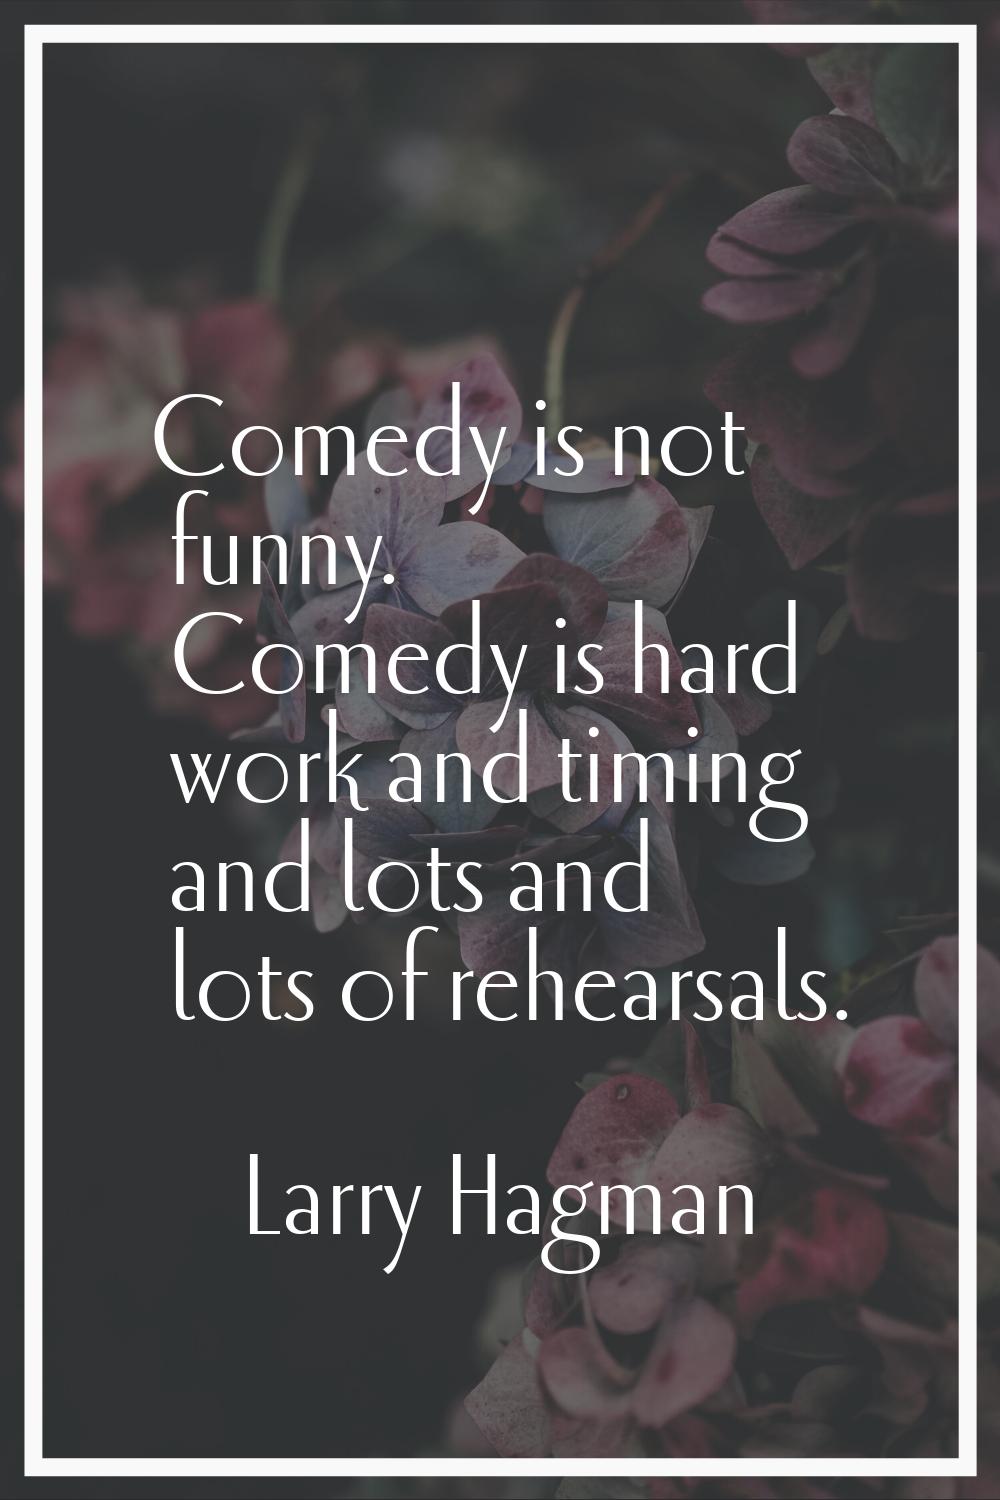 Comedy is not funny. Comedy is hard work and timing and lots and lots of rehearsals.